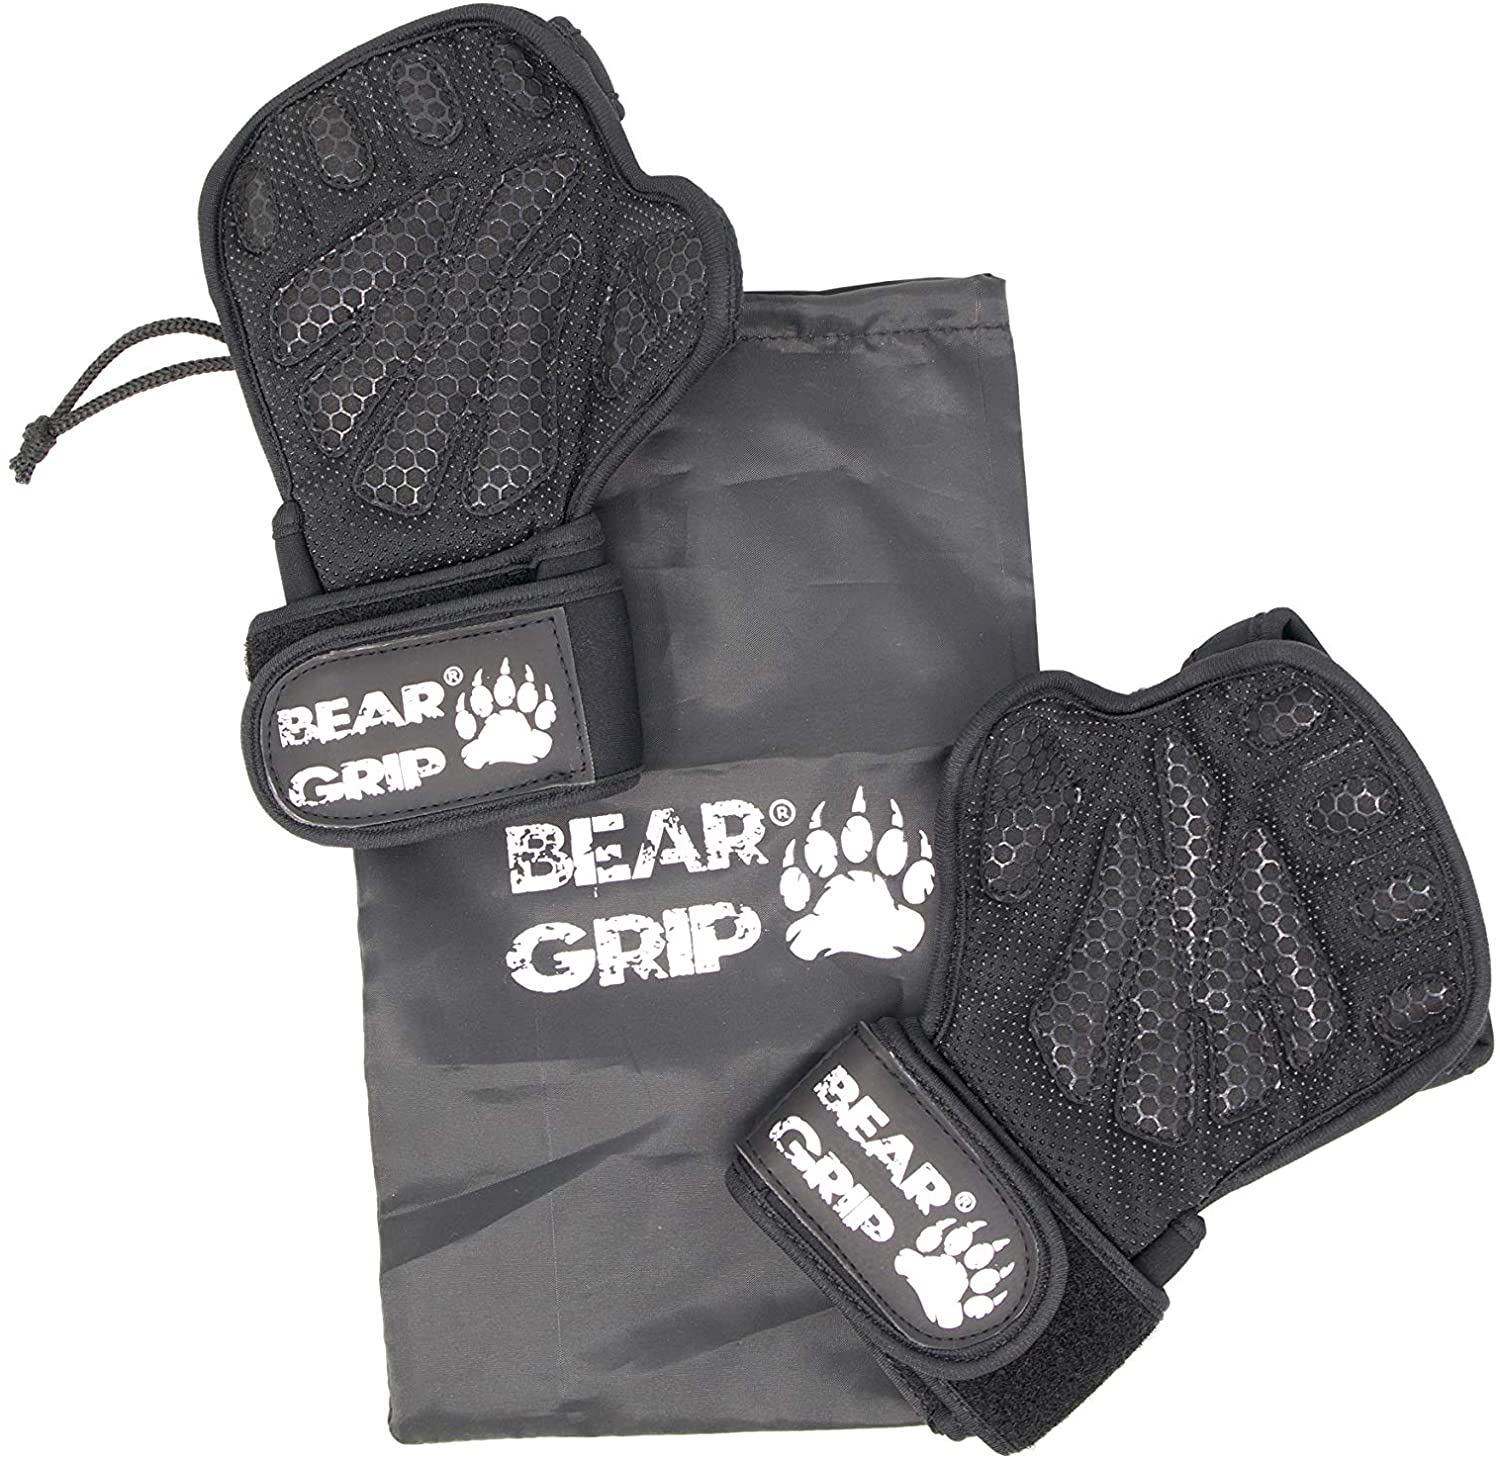 BEAR GRIP® Open Workout Gloves with Extra Palm Protection